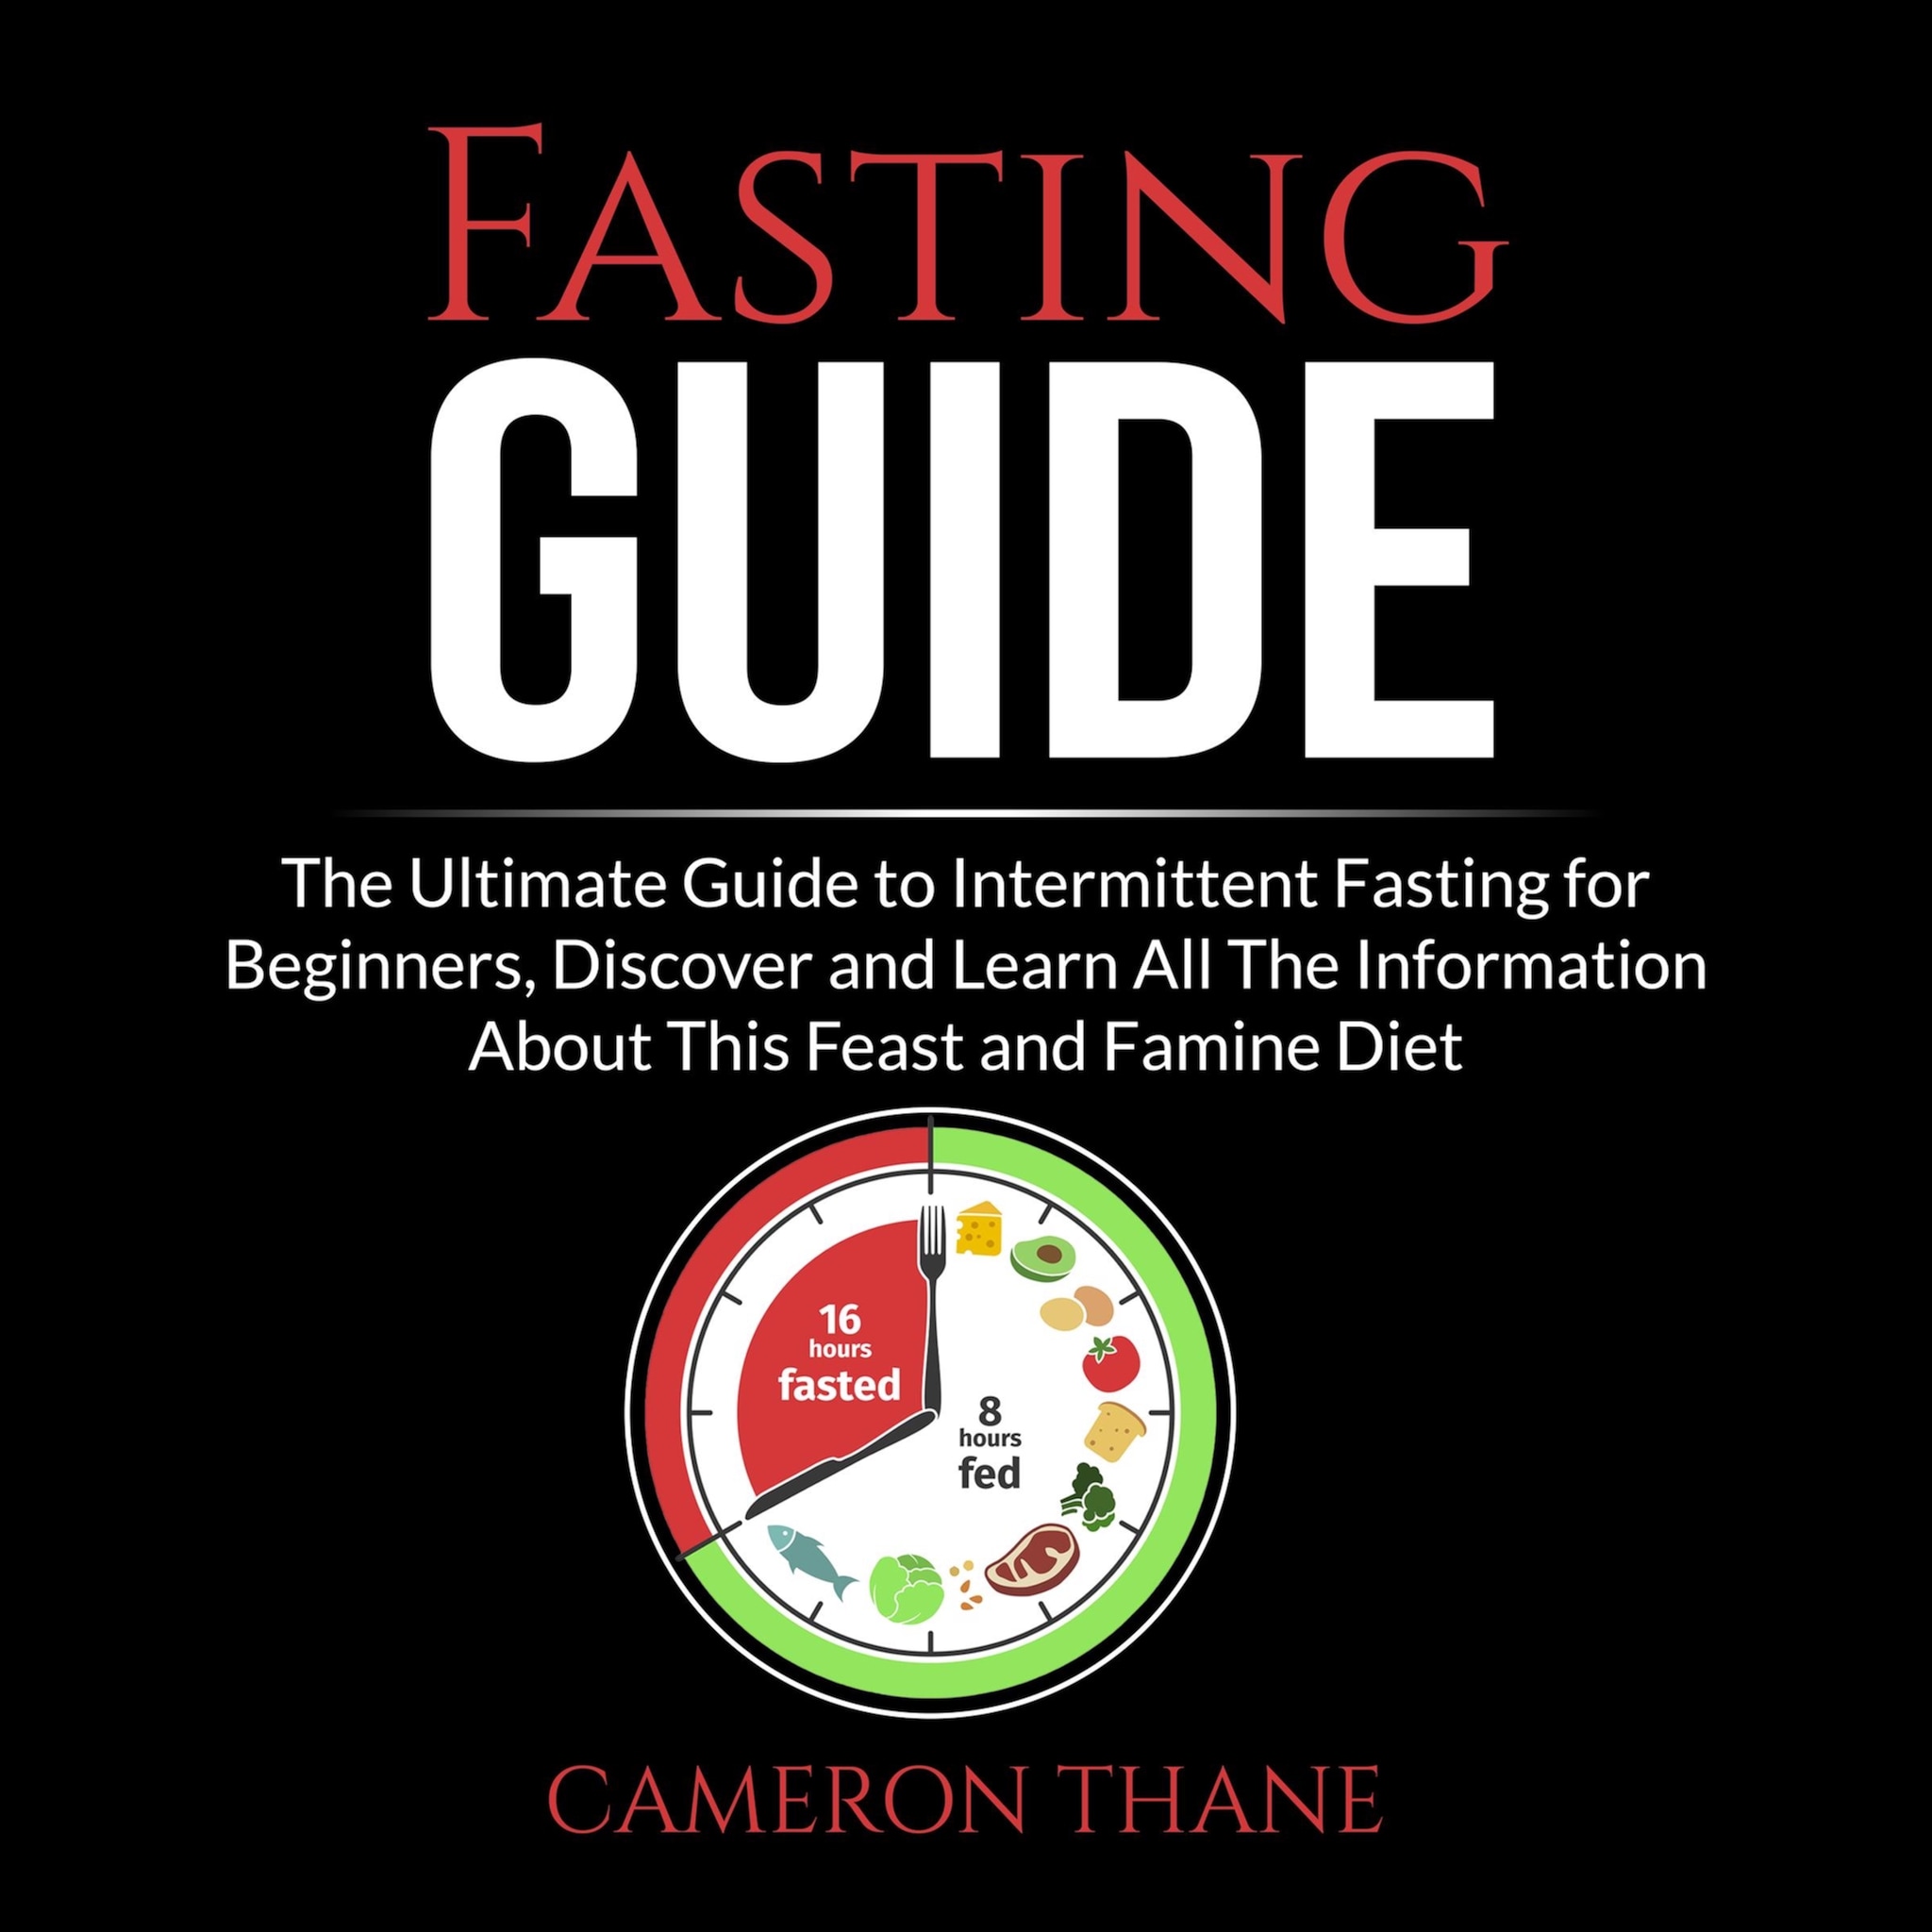 Fasting Guide: The Ultimate Guide to Intermittent Fasting for Beginners, Discover and Learn All The Information About This Feast and Famine Diet ilmaiseksi